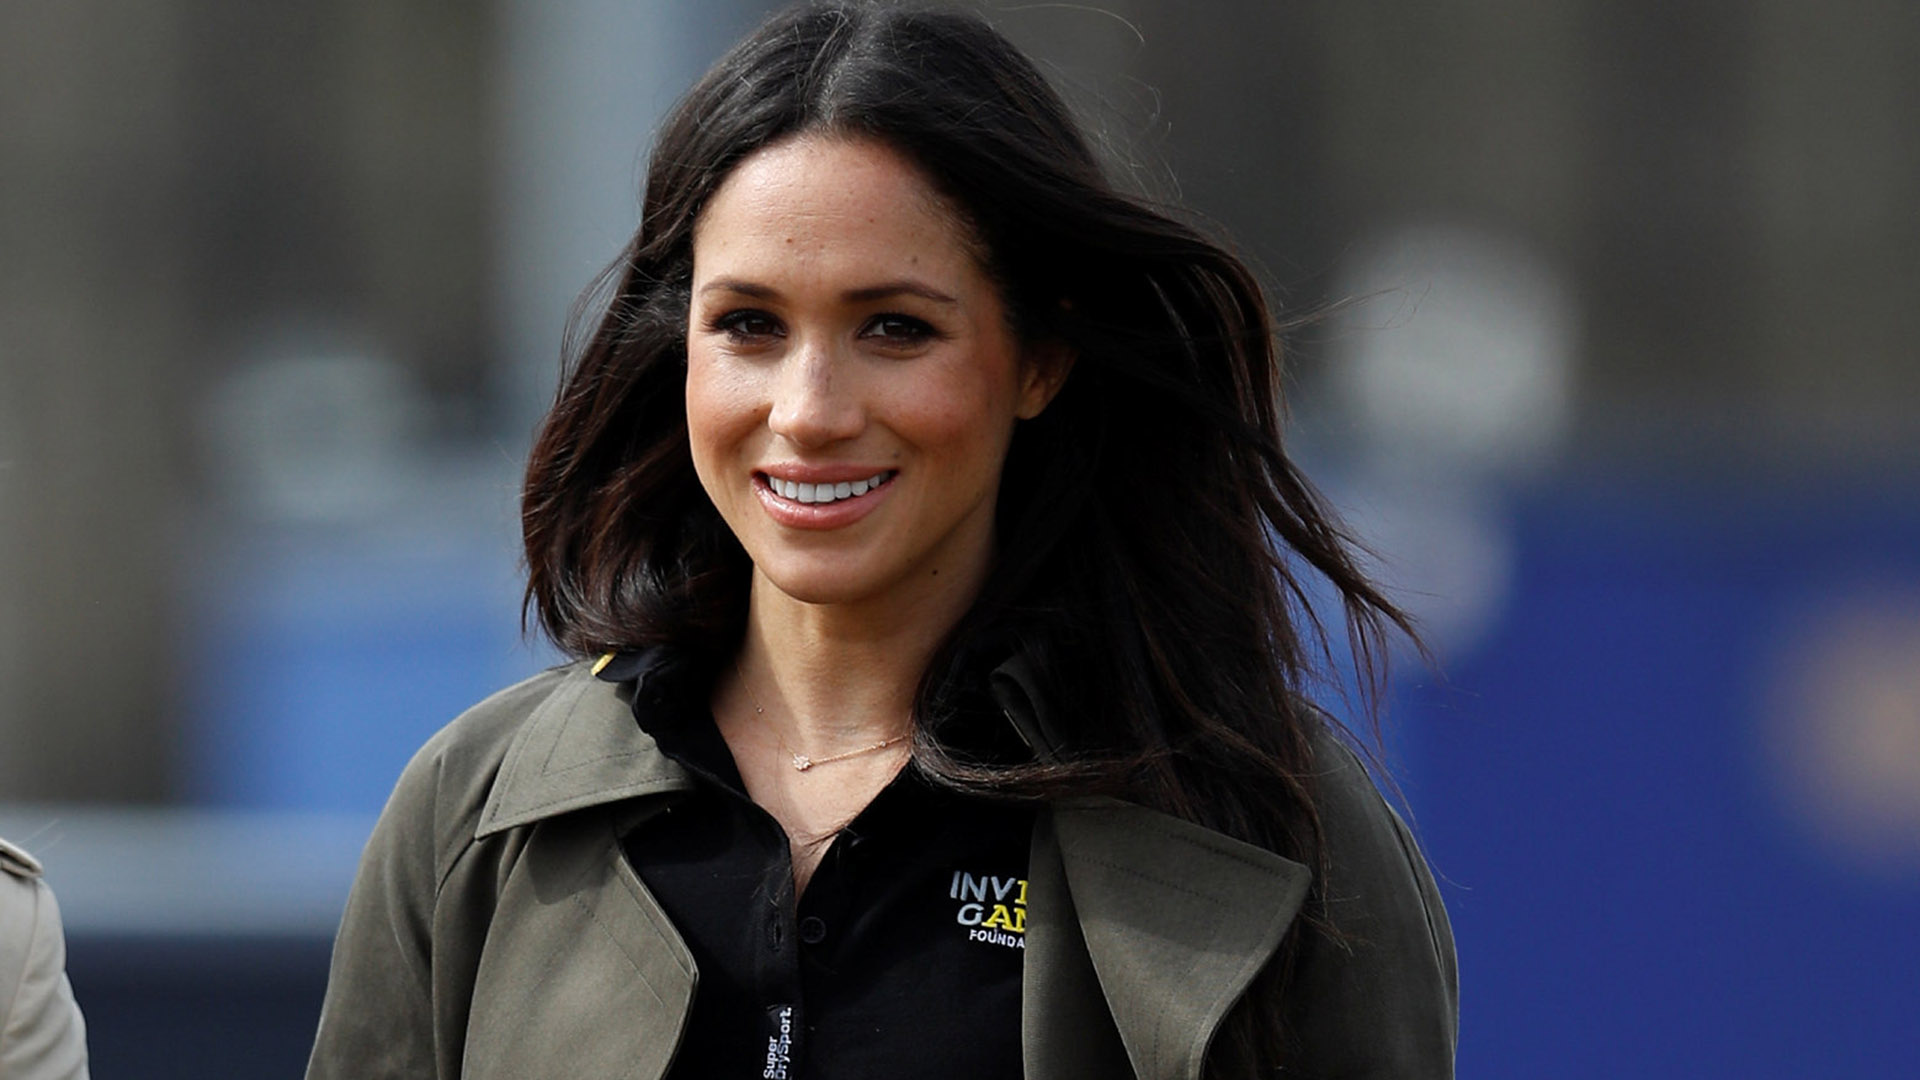 Actress Meghan Markle attend the UK team trials for the 2018 Invictus games in Sydney this October atUniversity of Bath Sports Training Village.